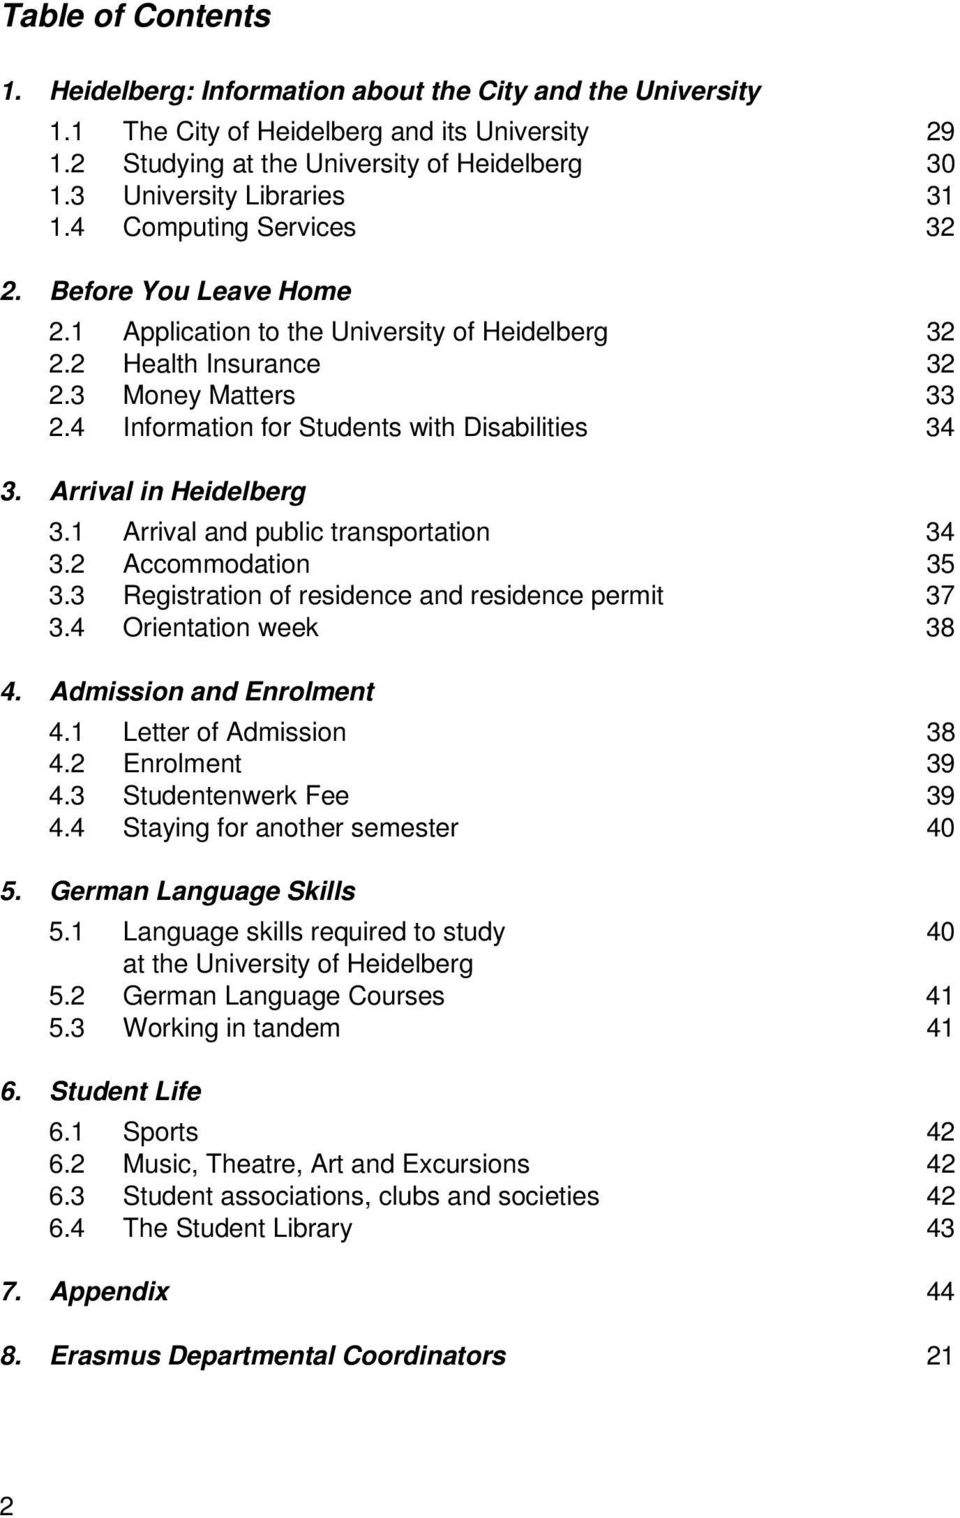 4 Information for Students with Disabilities 34 3. Arrival in Heidelberg 3.1 Arrival and public transportation 34 3.2 Accommodation 35 3.3 Registration of residence and residence permit 37 3.